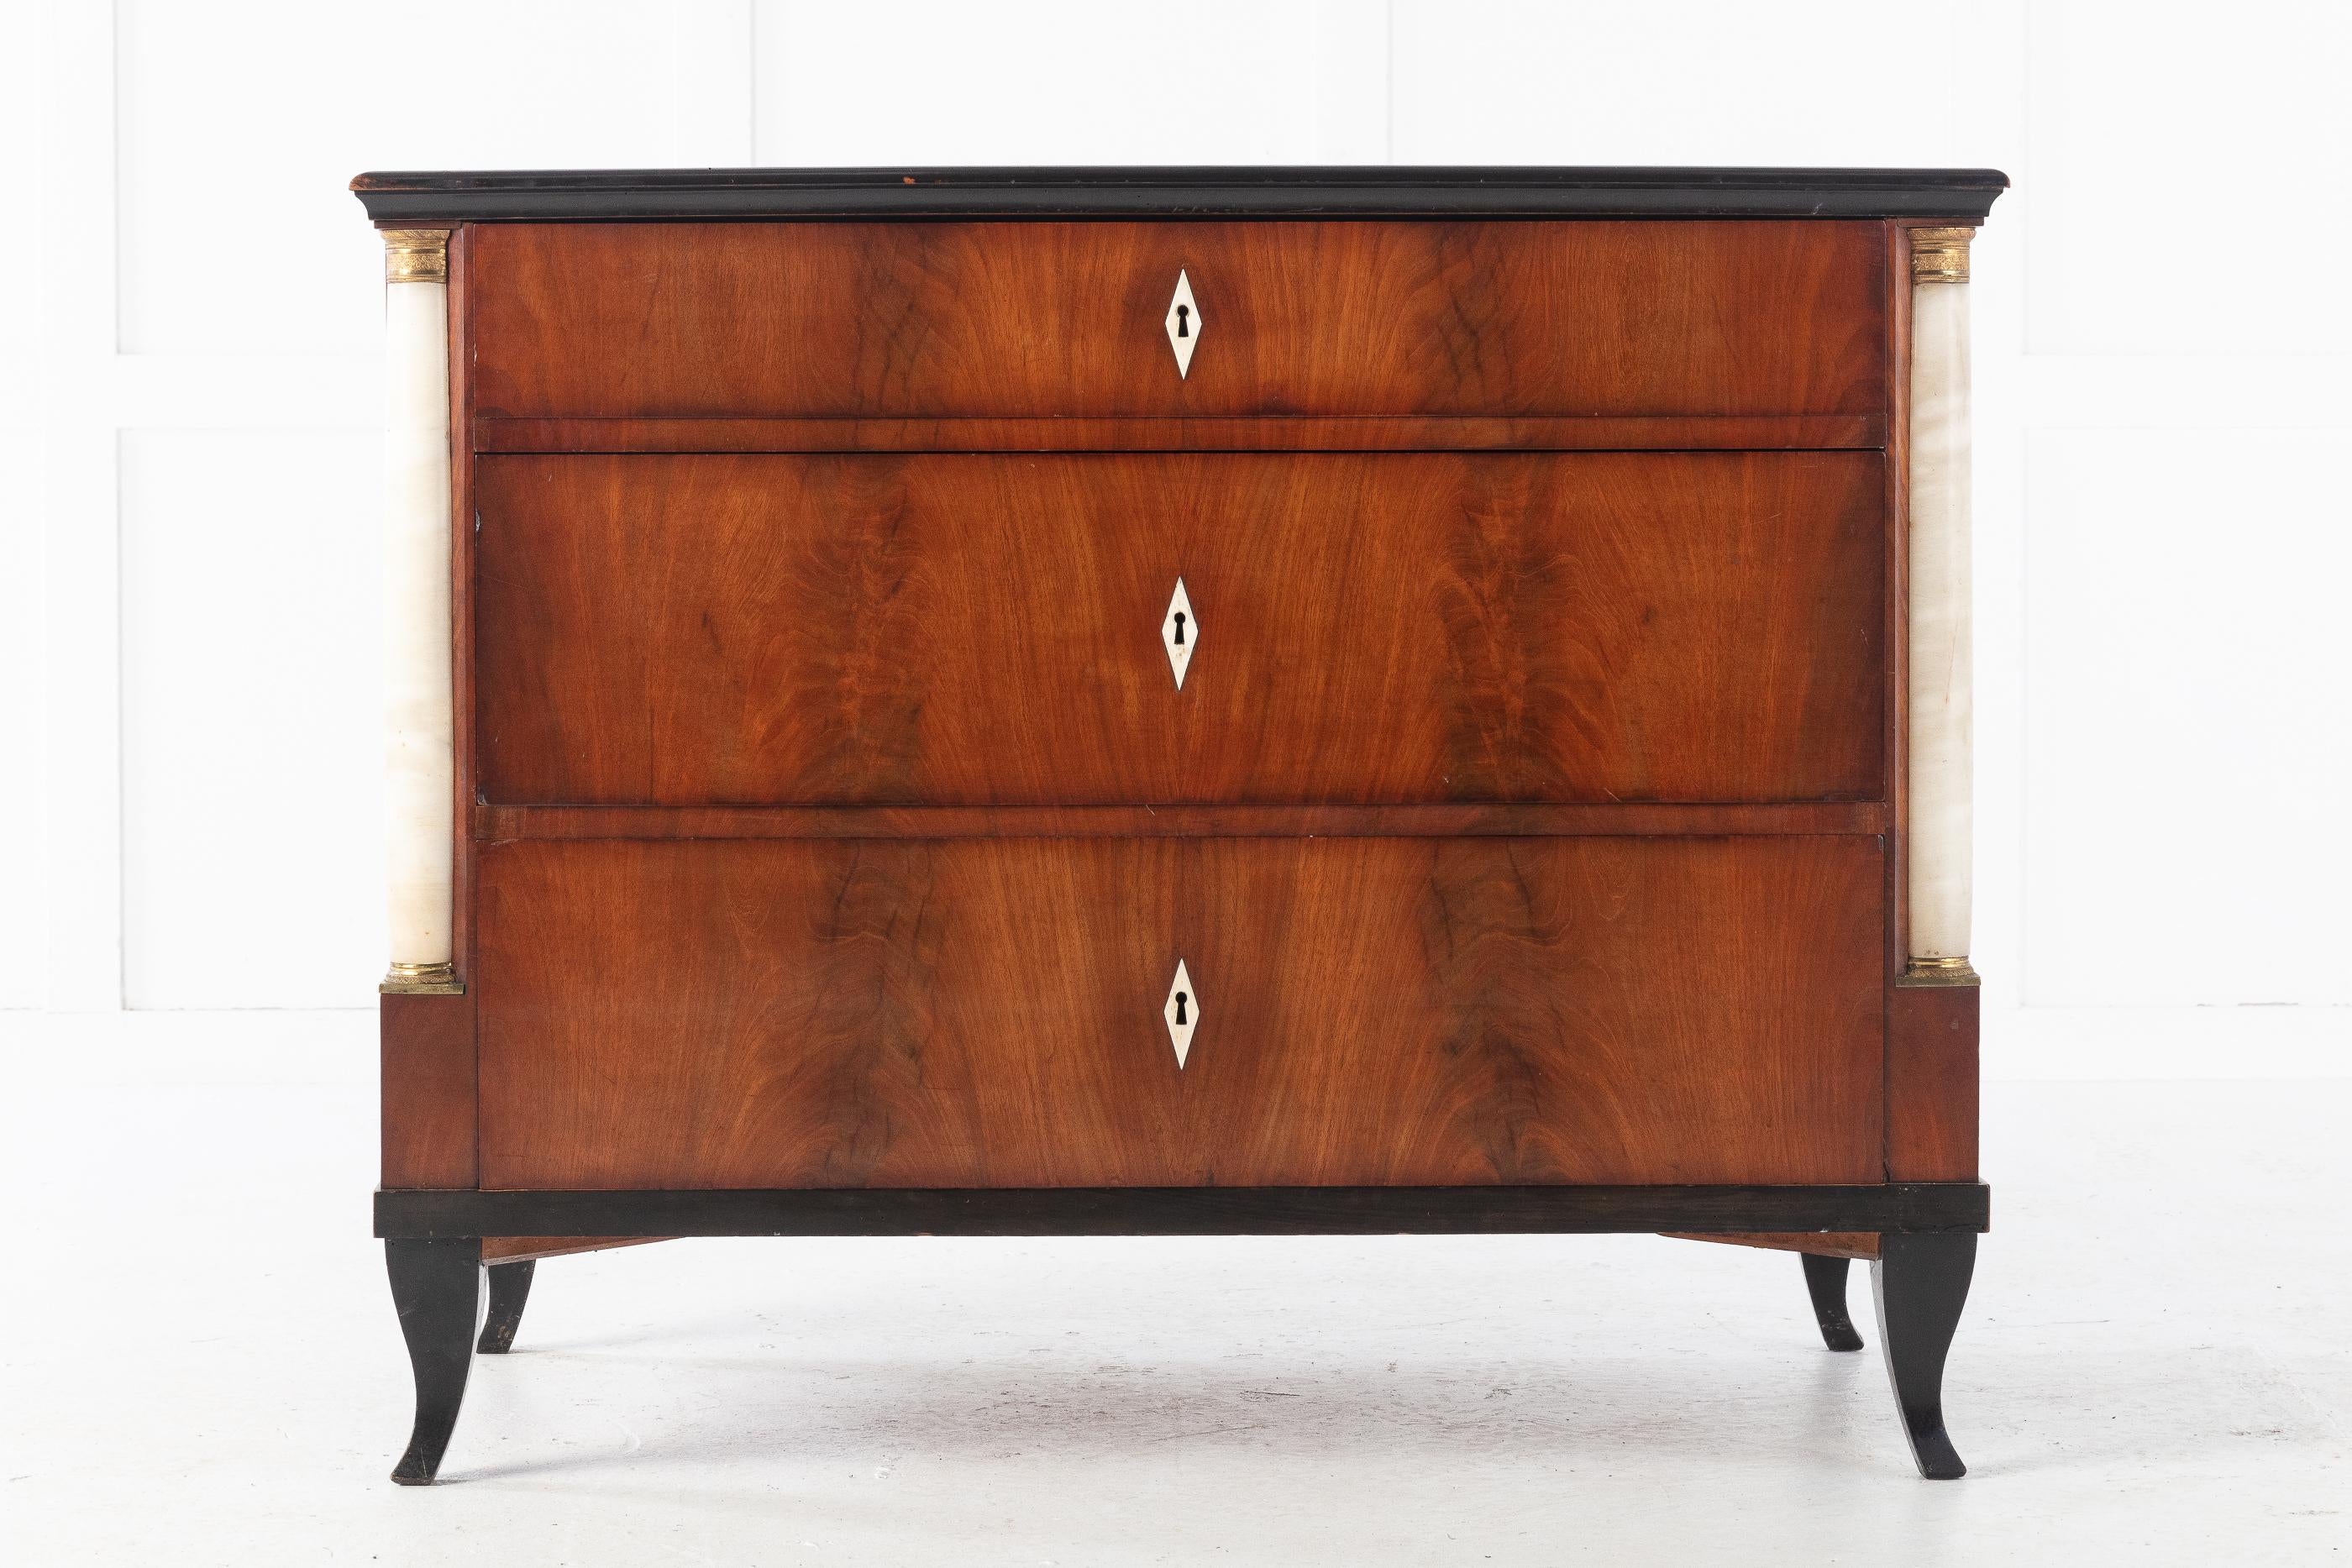 An excellent and very elegant example of this German mahogany Biedermeier chest, circa 1820. It has a very nice use of veneers.

The drawers are flanked by bronze detailed alabaster columns. Standing on splayed feet with ebonized detail.

Nice